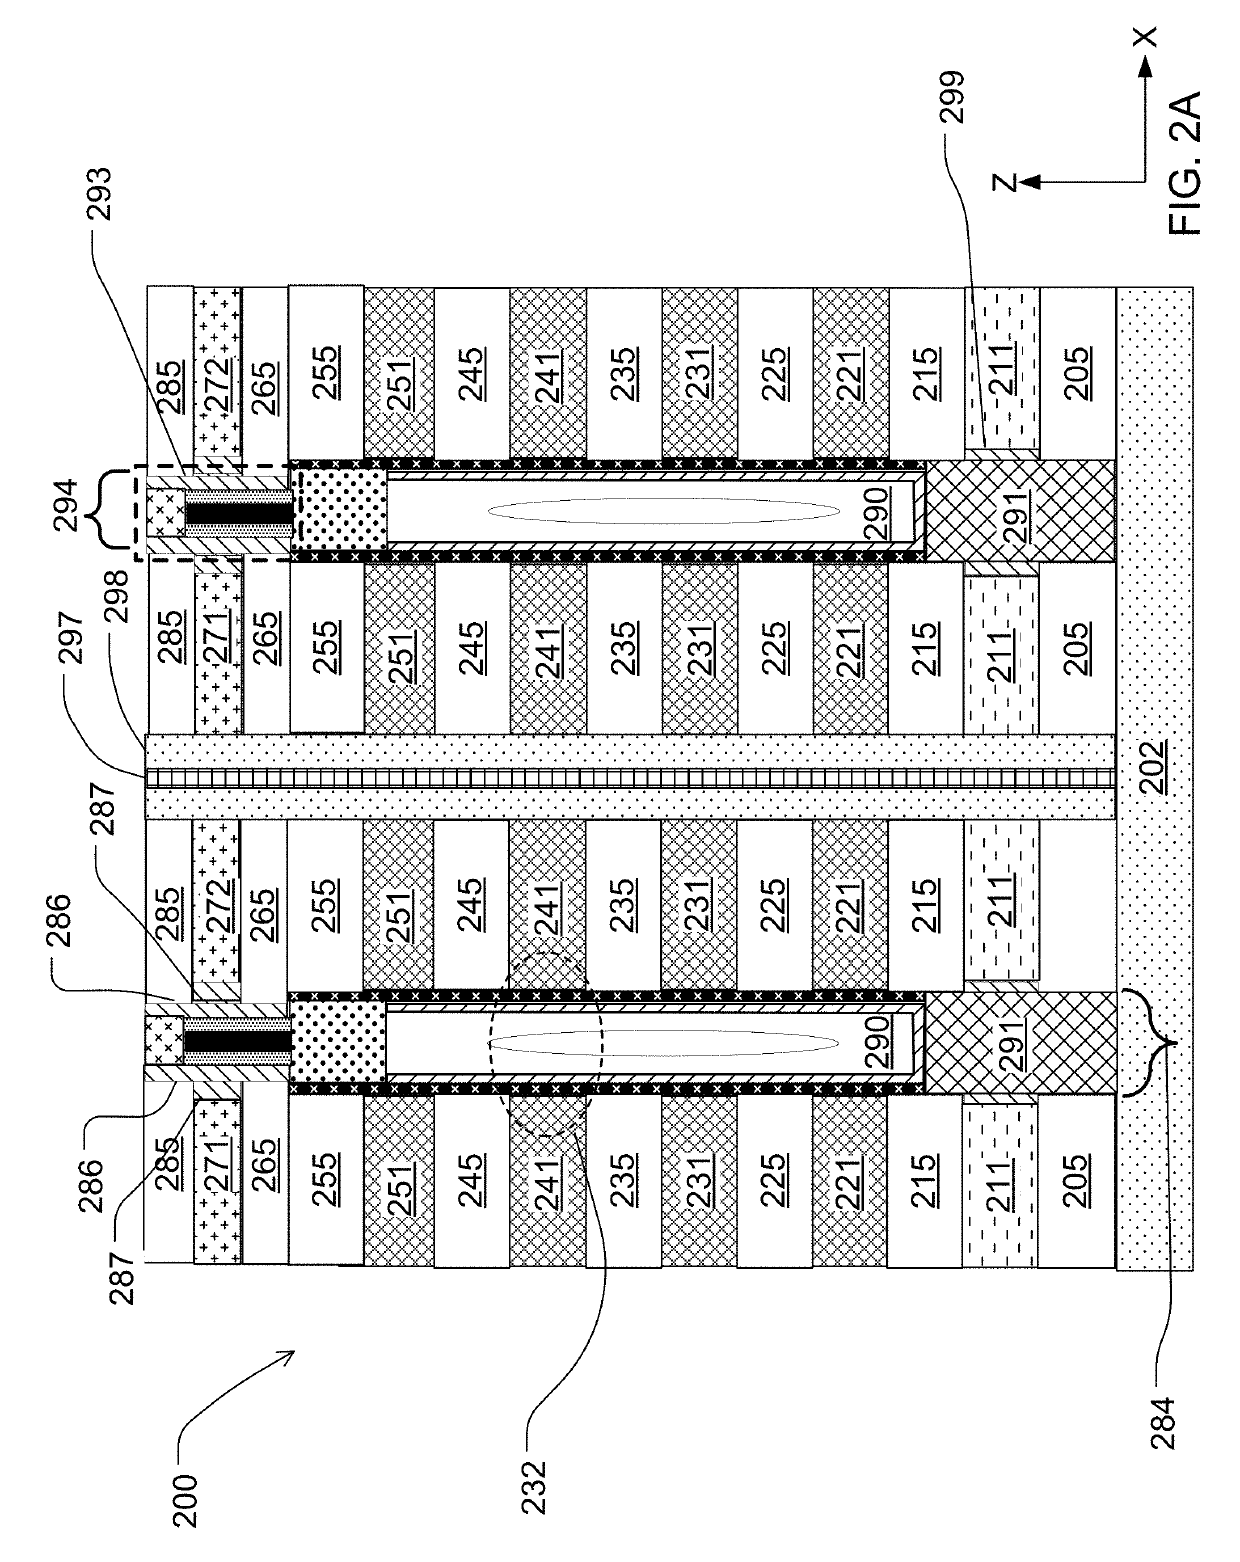 String select line gate oxide method for 3D vertical channel NAND memory